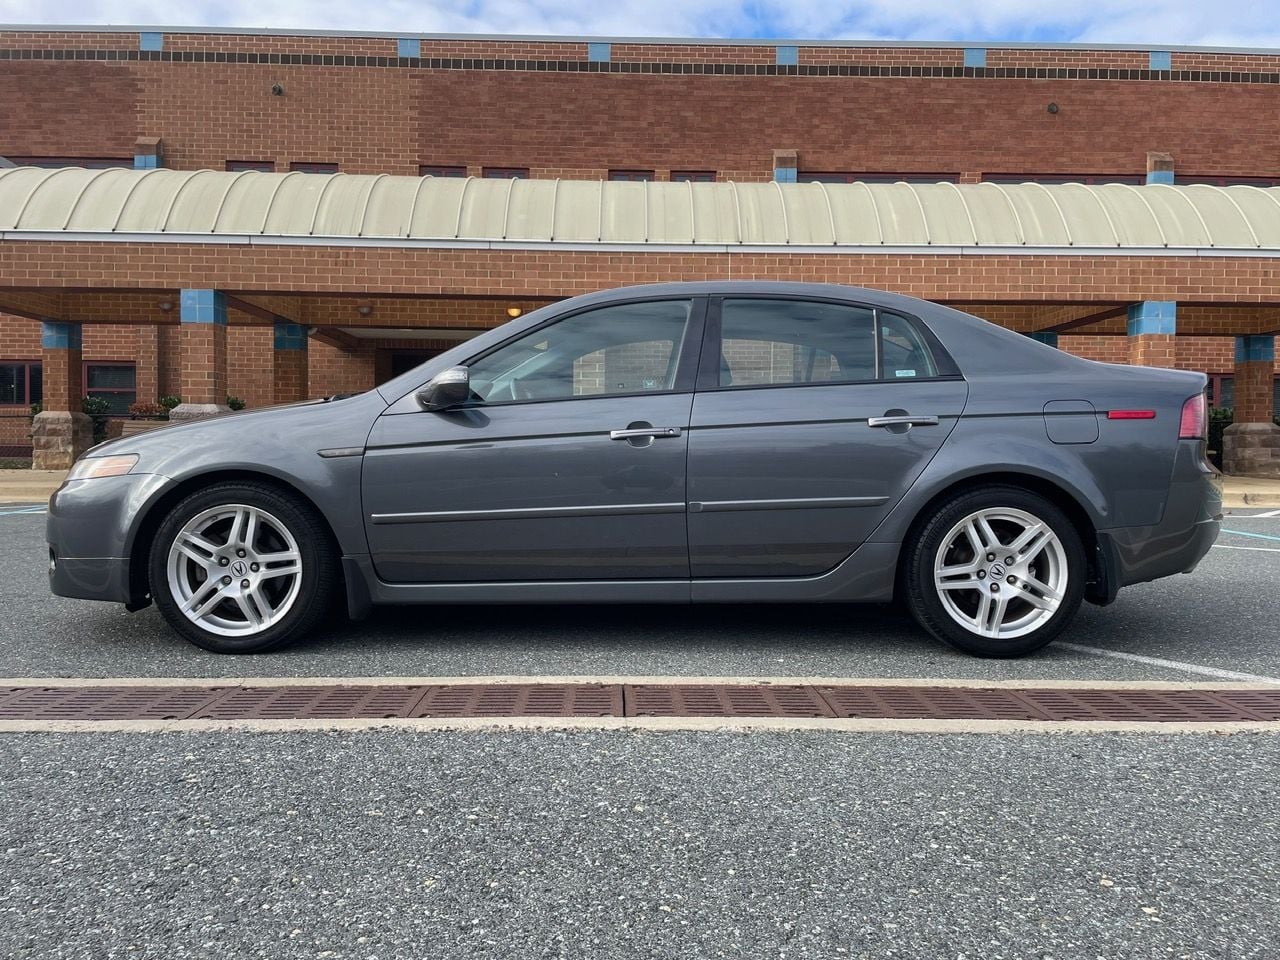 2008 Acura TL - FS: 2008 ACURA TL // 67k MILES // 2WD BASE - Used - VIN 19UUA66208A005149 - 67,060 Miles - 6 cyl - 2WD - Automatic - Sedan - Gray - Rockville, MD 20850, United States